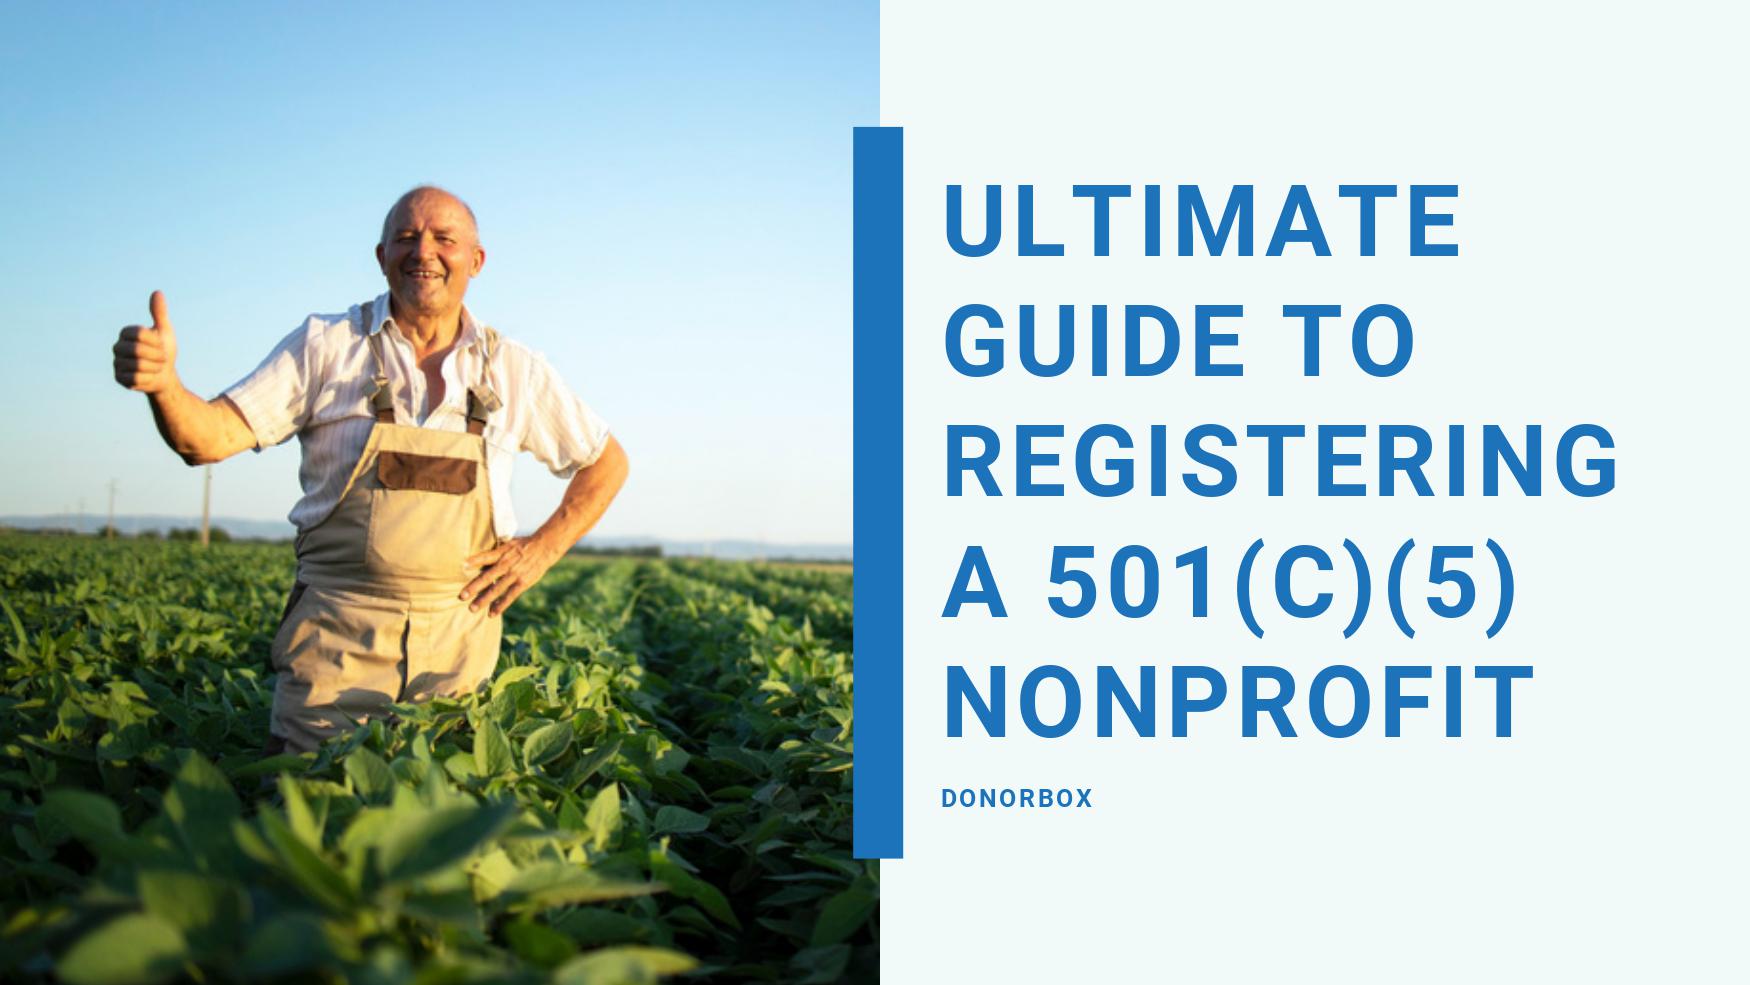 How to Start a 501c5: Ultimate Guide to Registering a 501(c)(5) Nonprofit